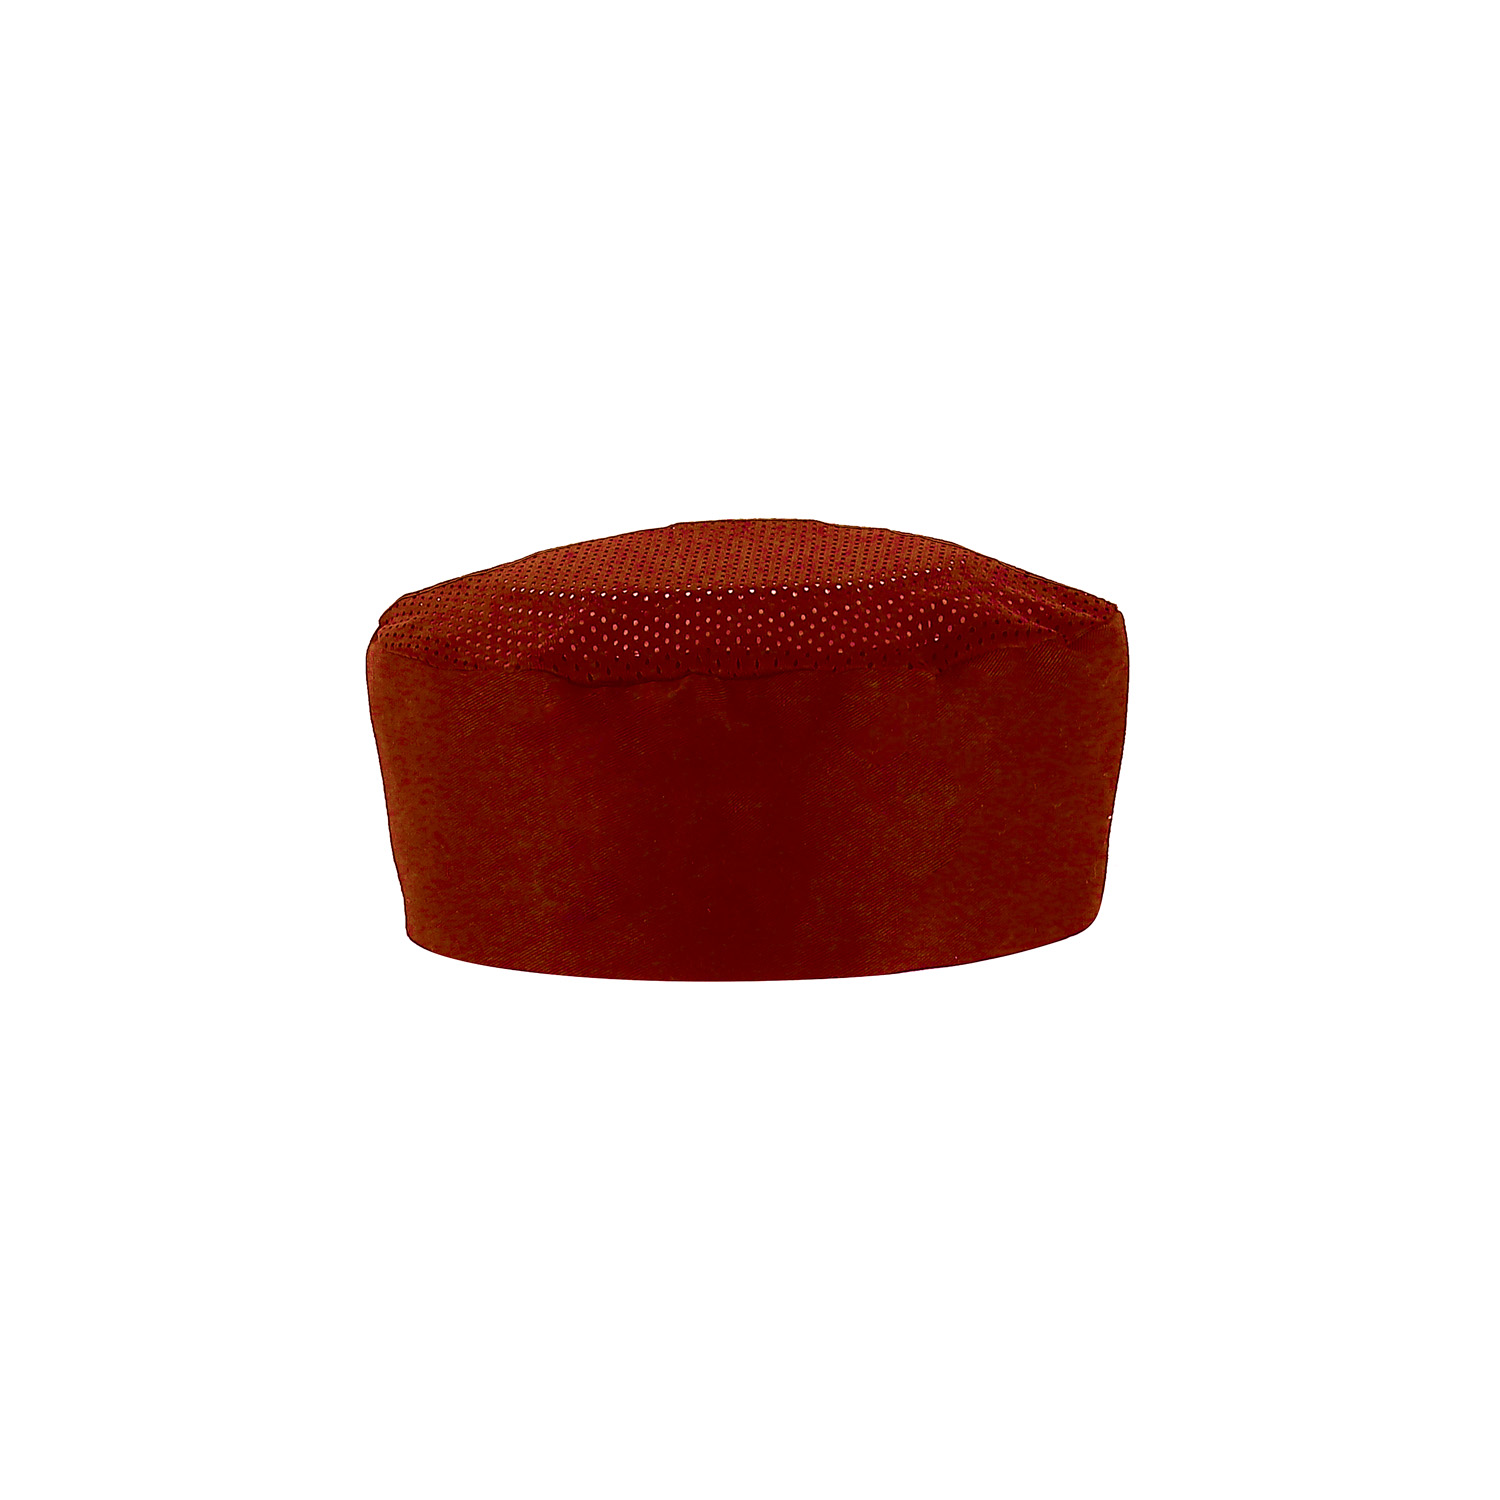 CAC China APHT-1RL Chef's Pride Red Pillbox Hat 3 1/2" H, L/XL